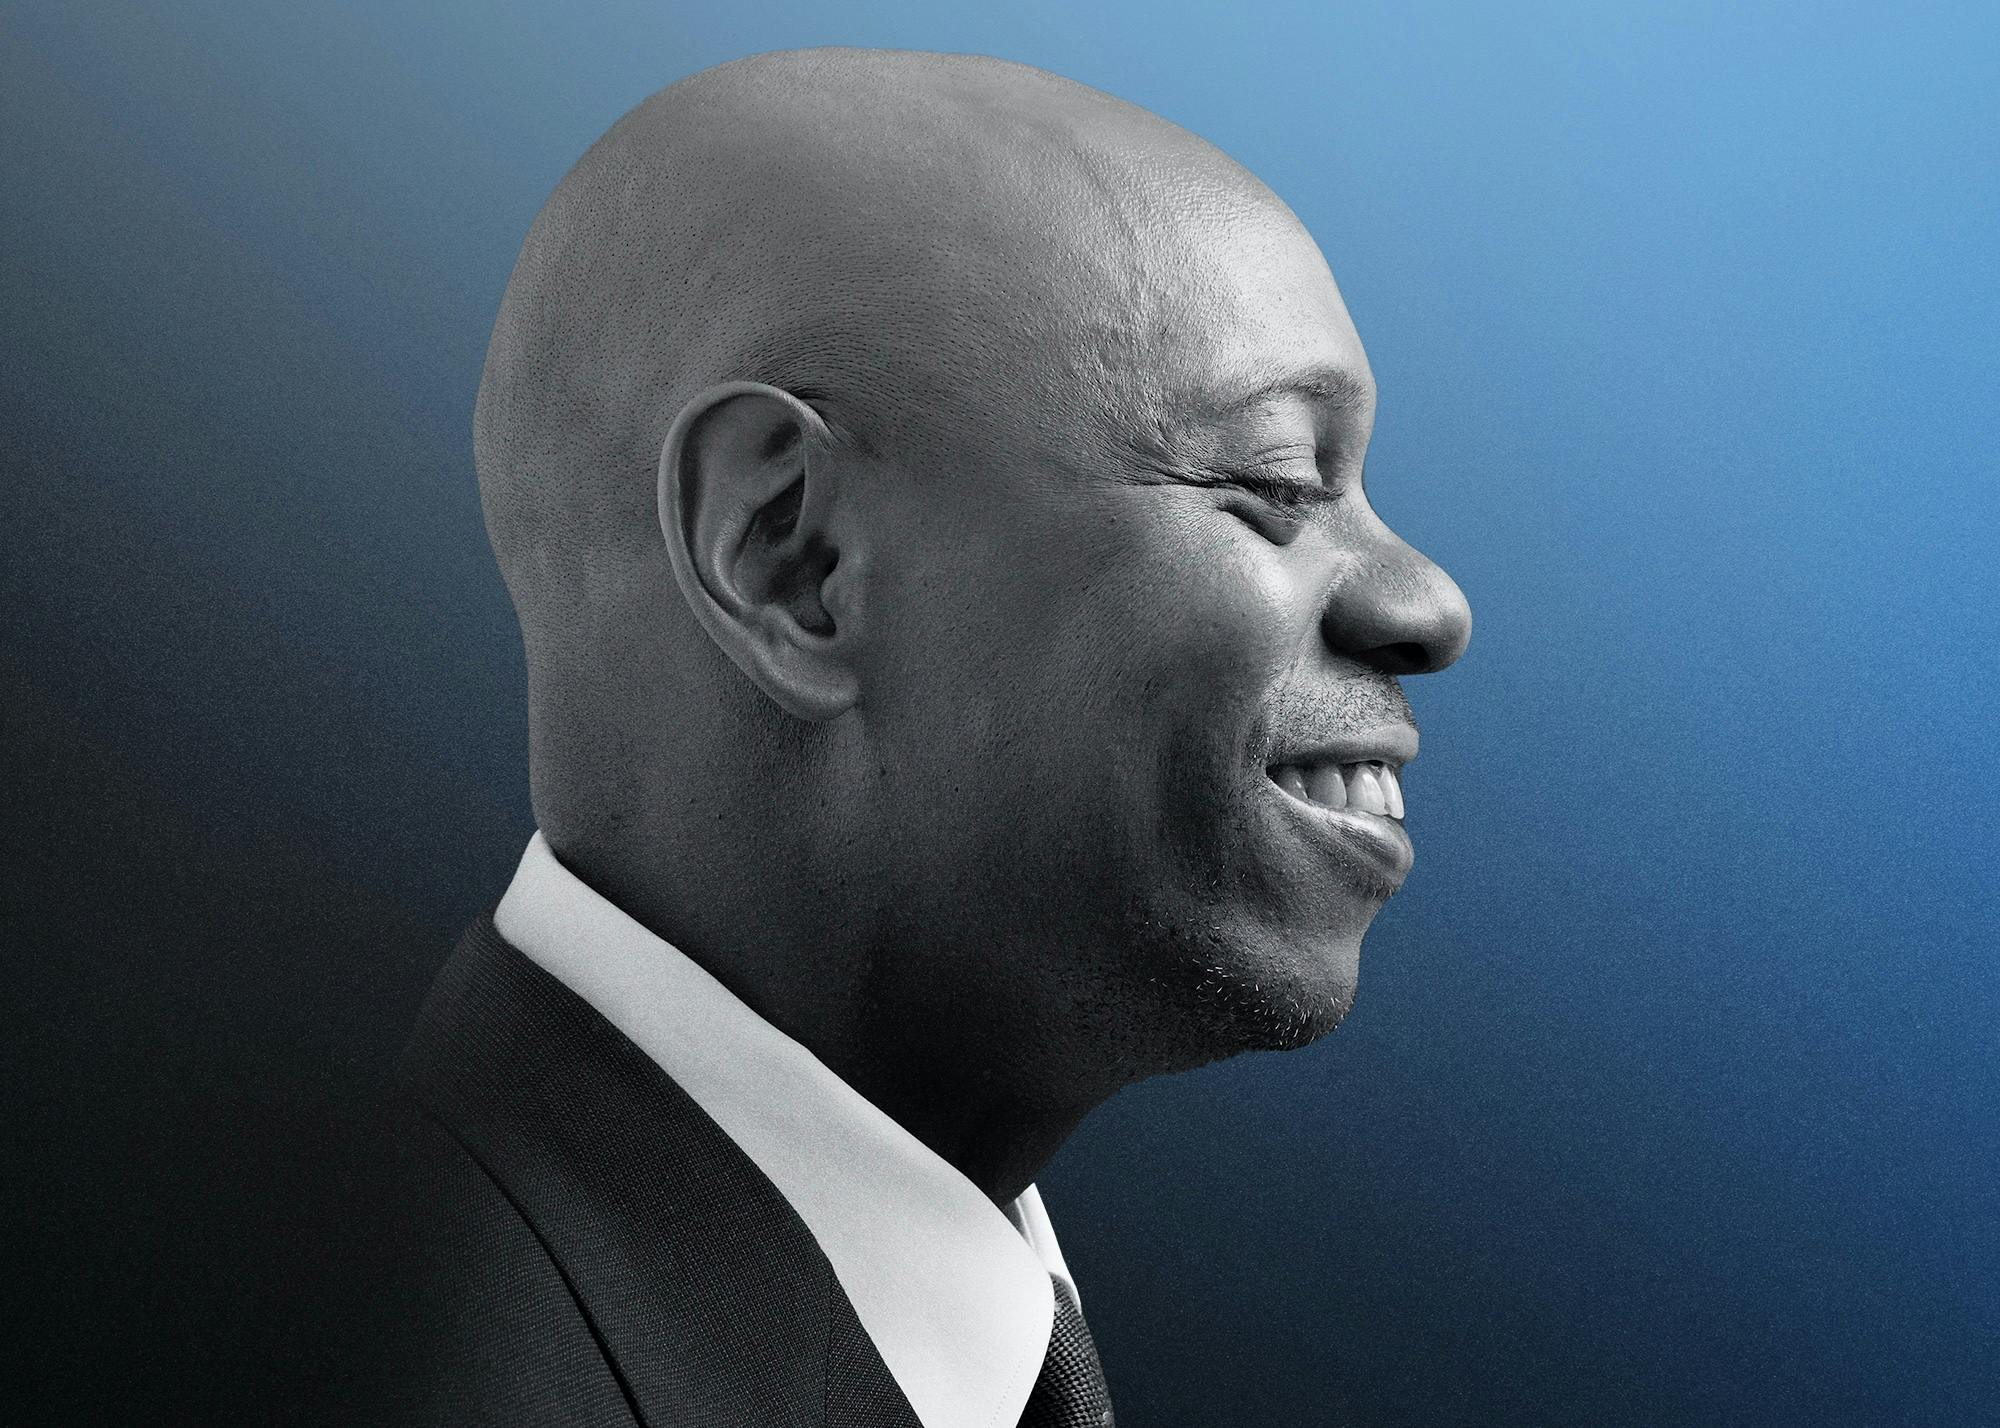 A profile shot of Dave Chappelle smiling. He wears a dark suit and white shirt, and the background is a navy gradient.